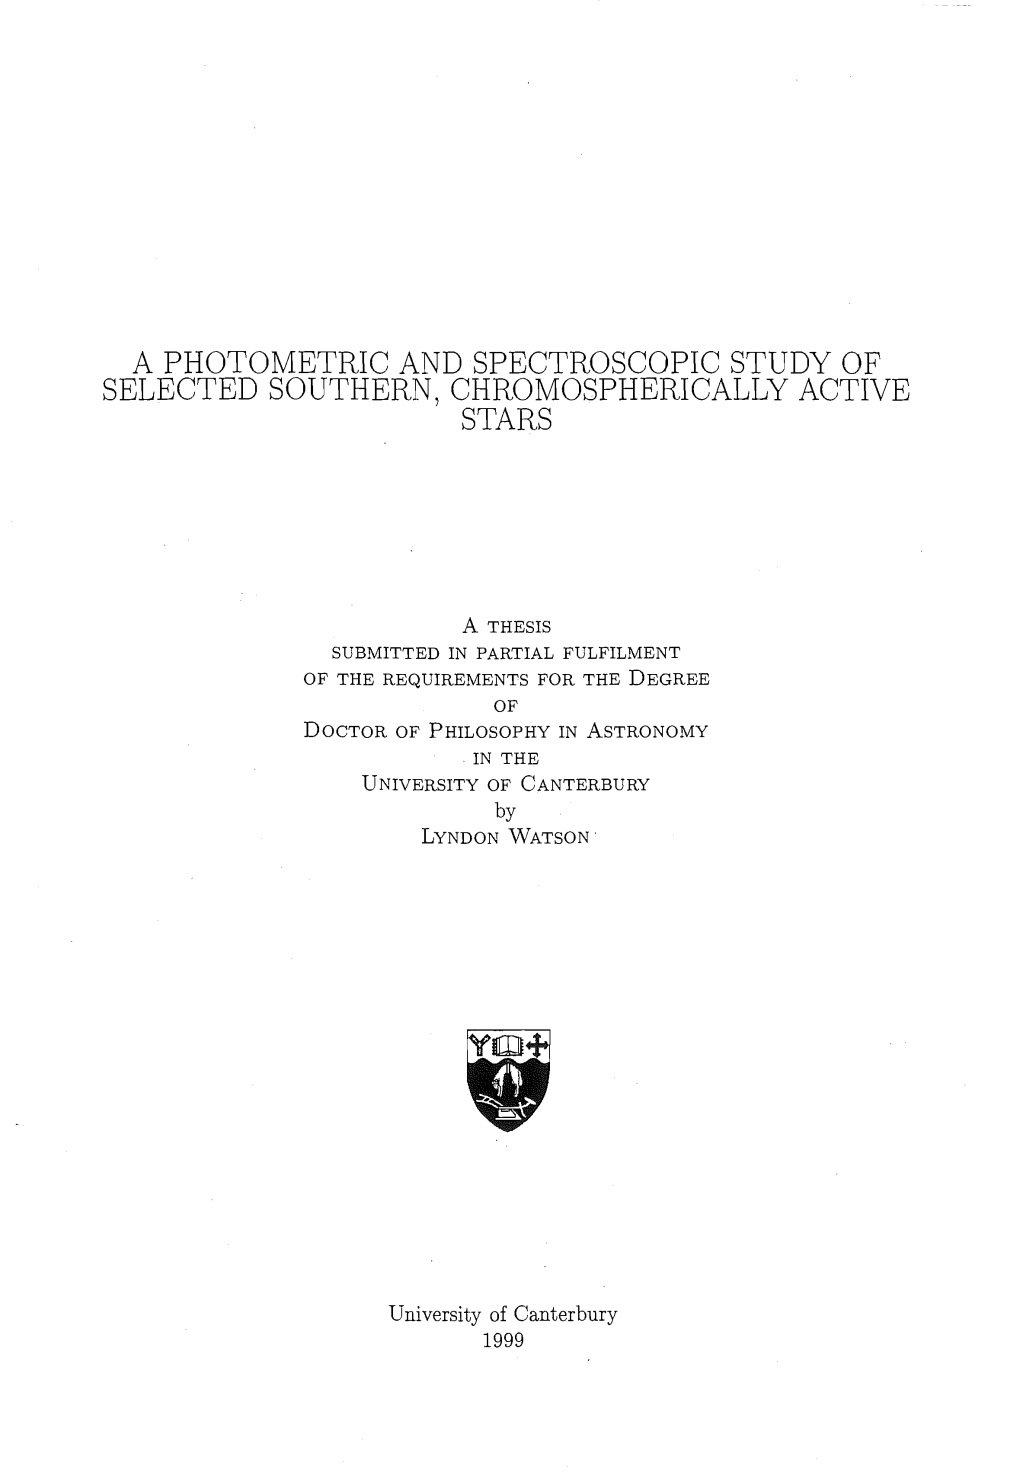 A Photometric and Spectroscopic Study of Selected Southern, Chromospherically Active Stars